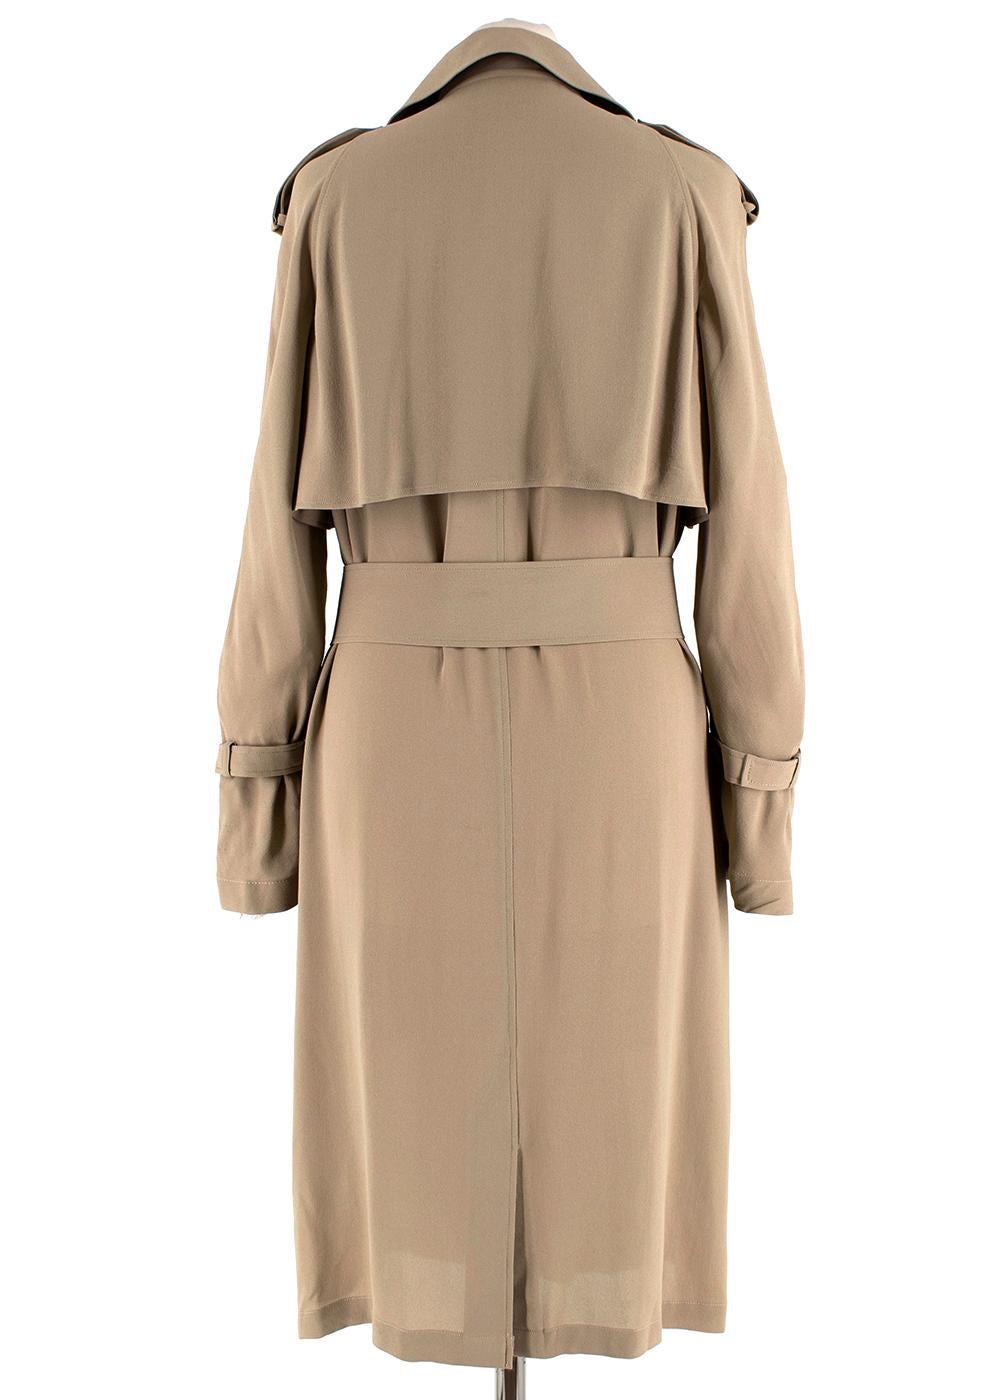 Michael Kors Tan Trench Duster

- Hidden buttons
- Classic trench coat details
- Flowy
- Light weight

Materials:
- 100% Silk
Lining 
- 65% Acetate
- 35% Rayon

Professional dry cleaning
Made in Italy

